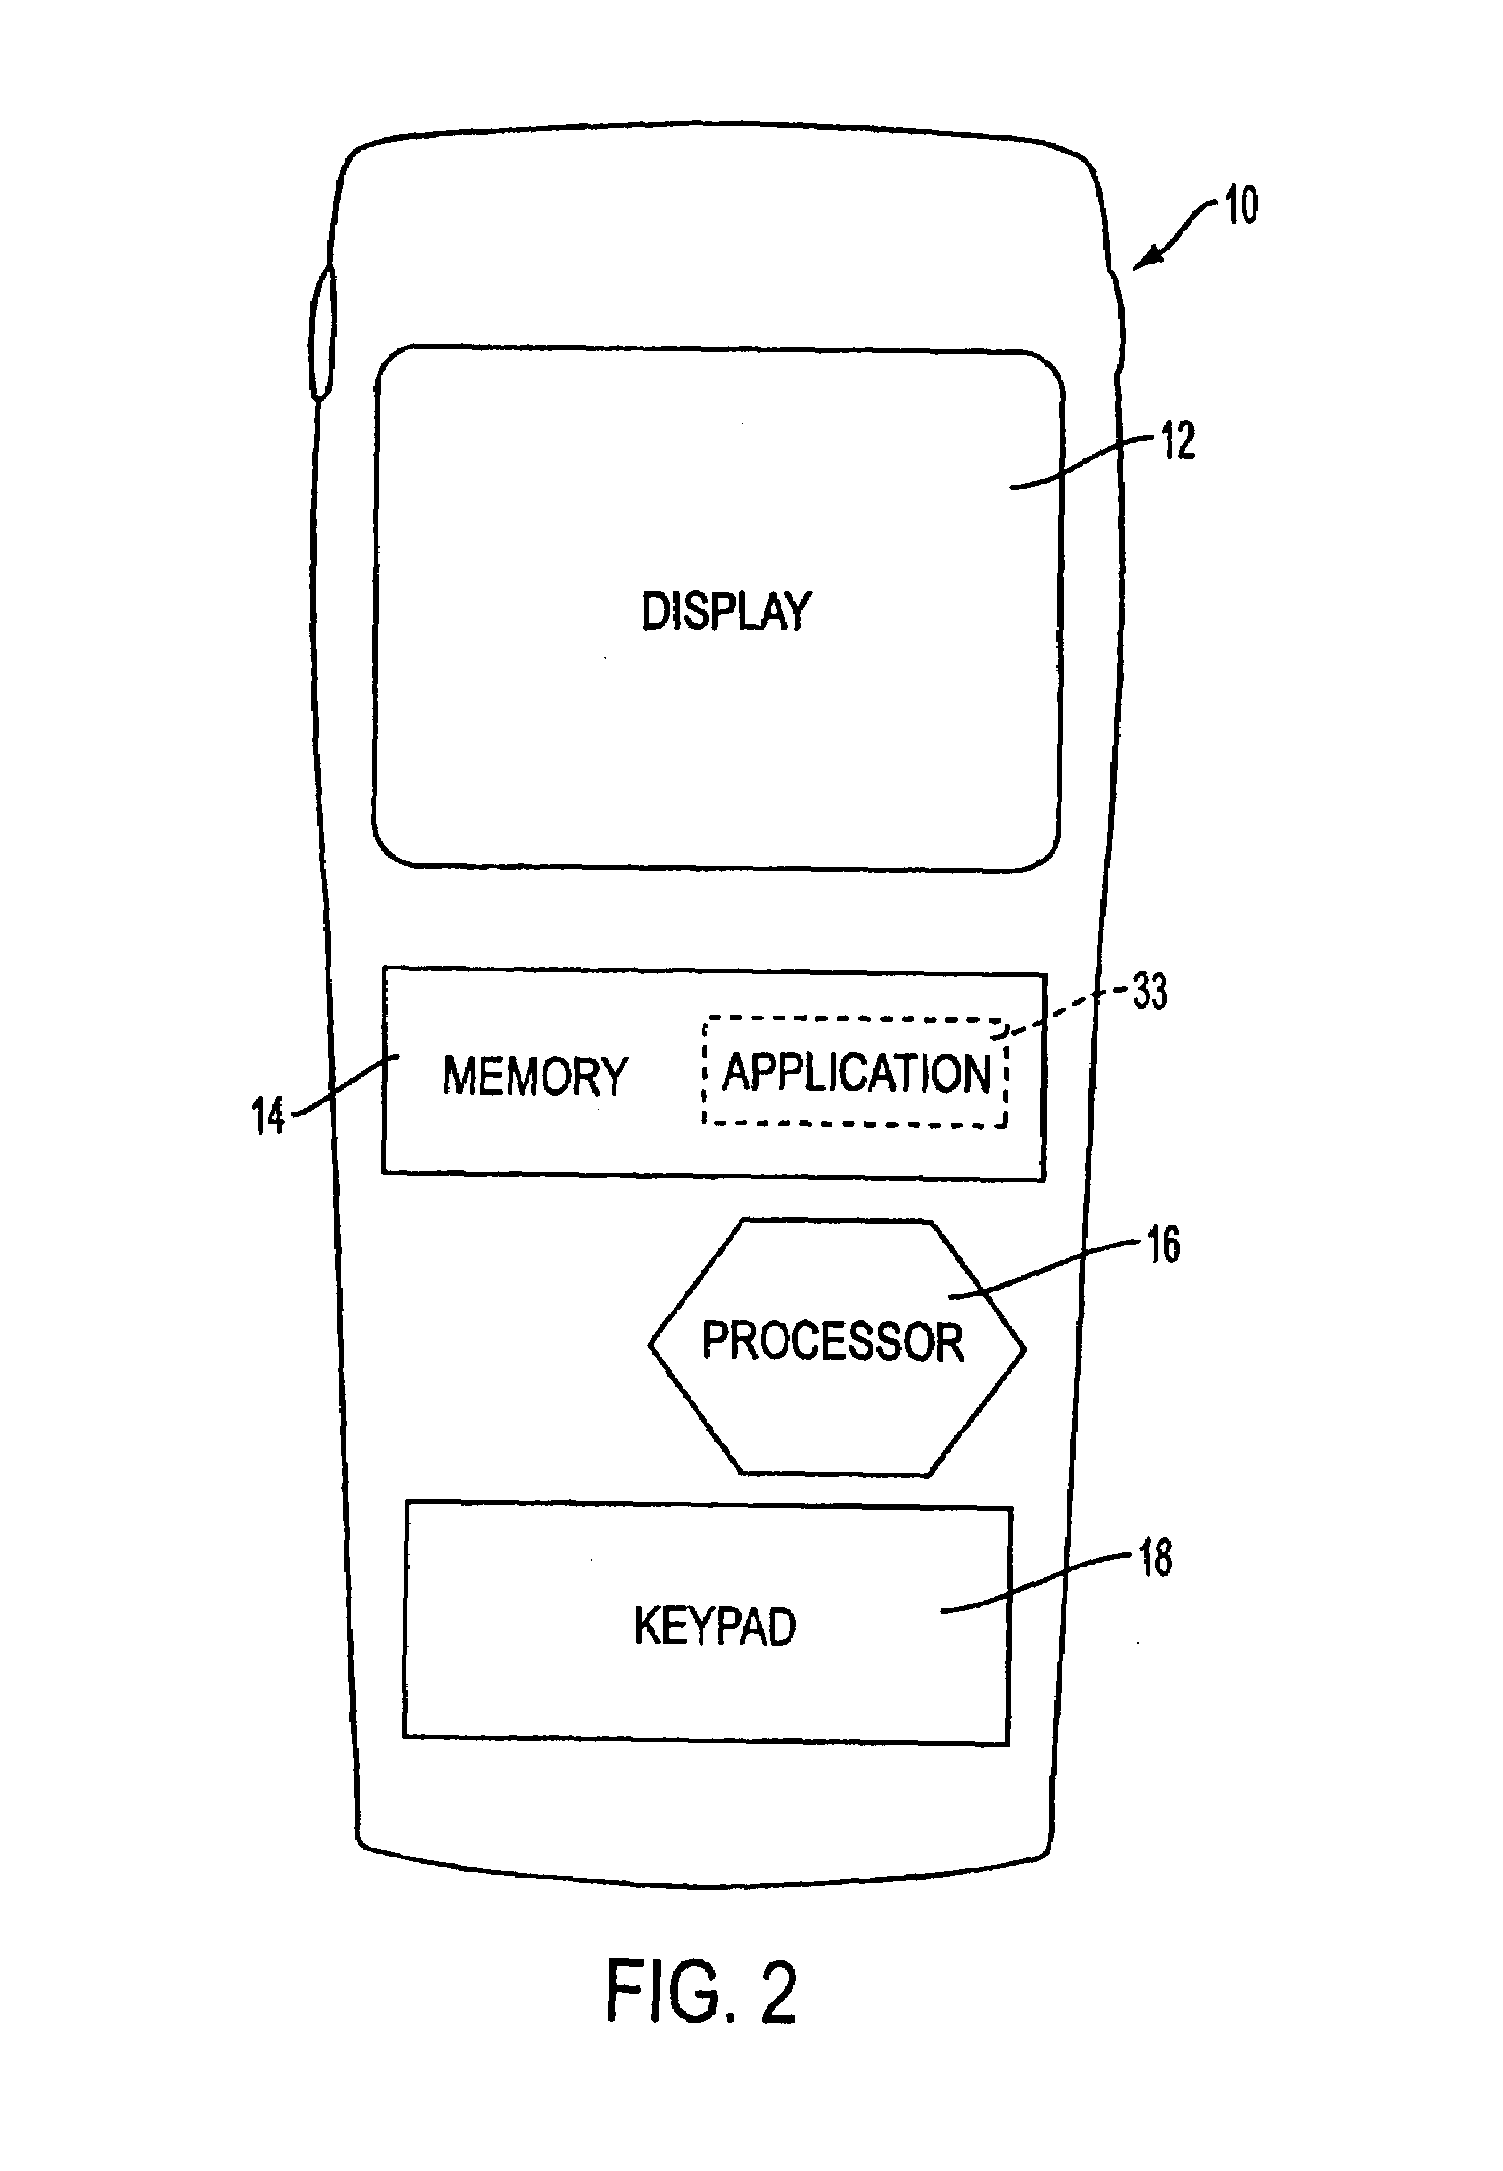 System and method for navigating applications using a graphical user interface